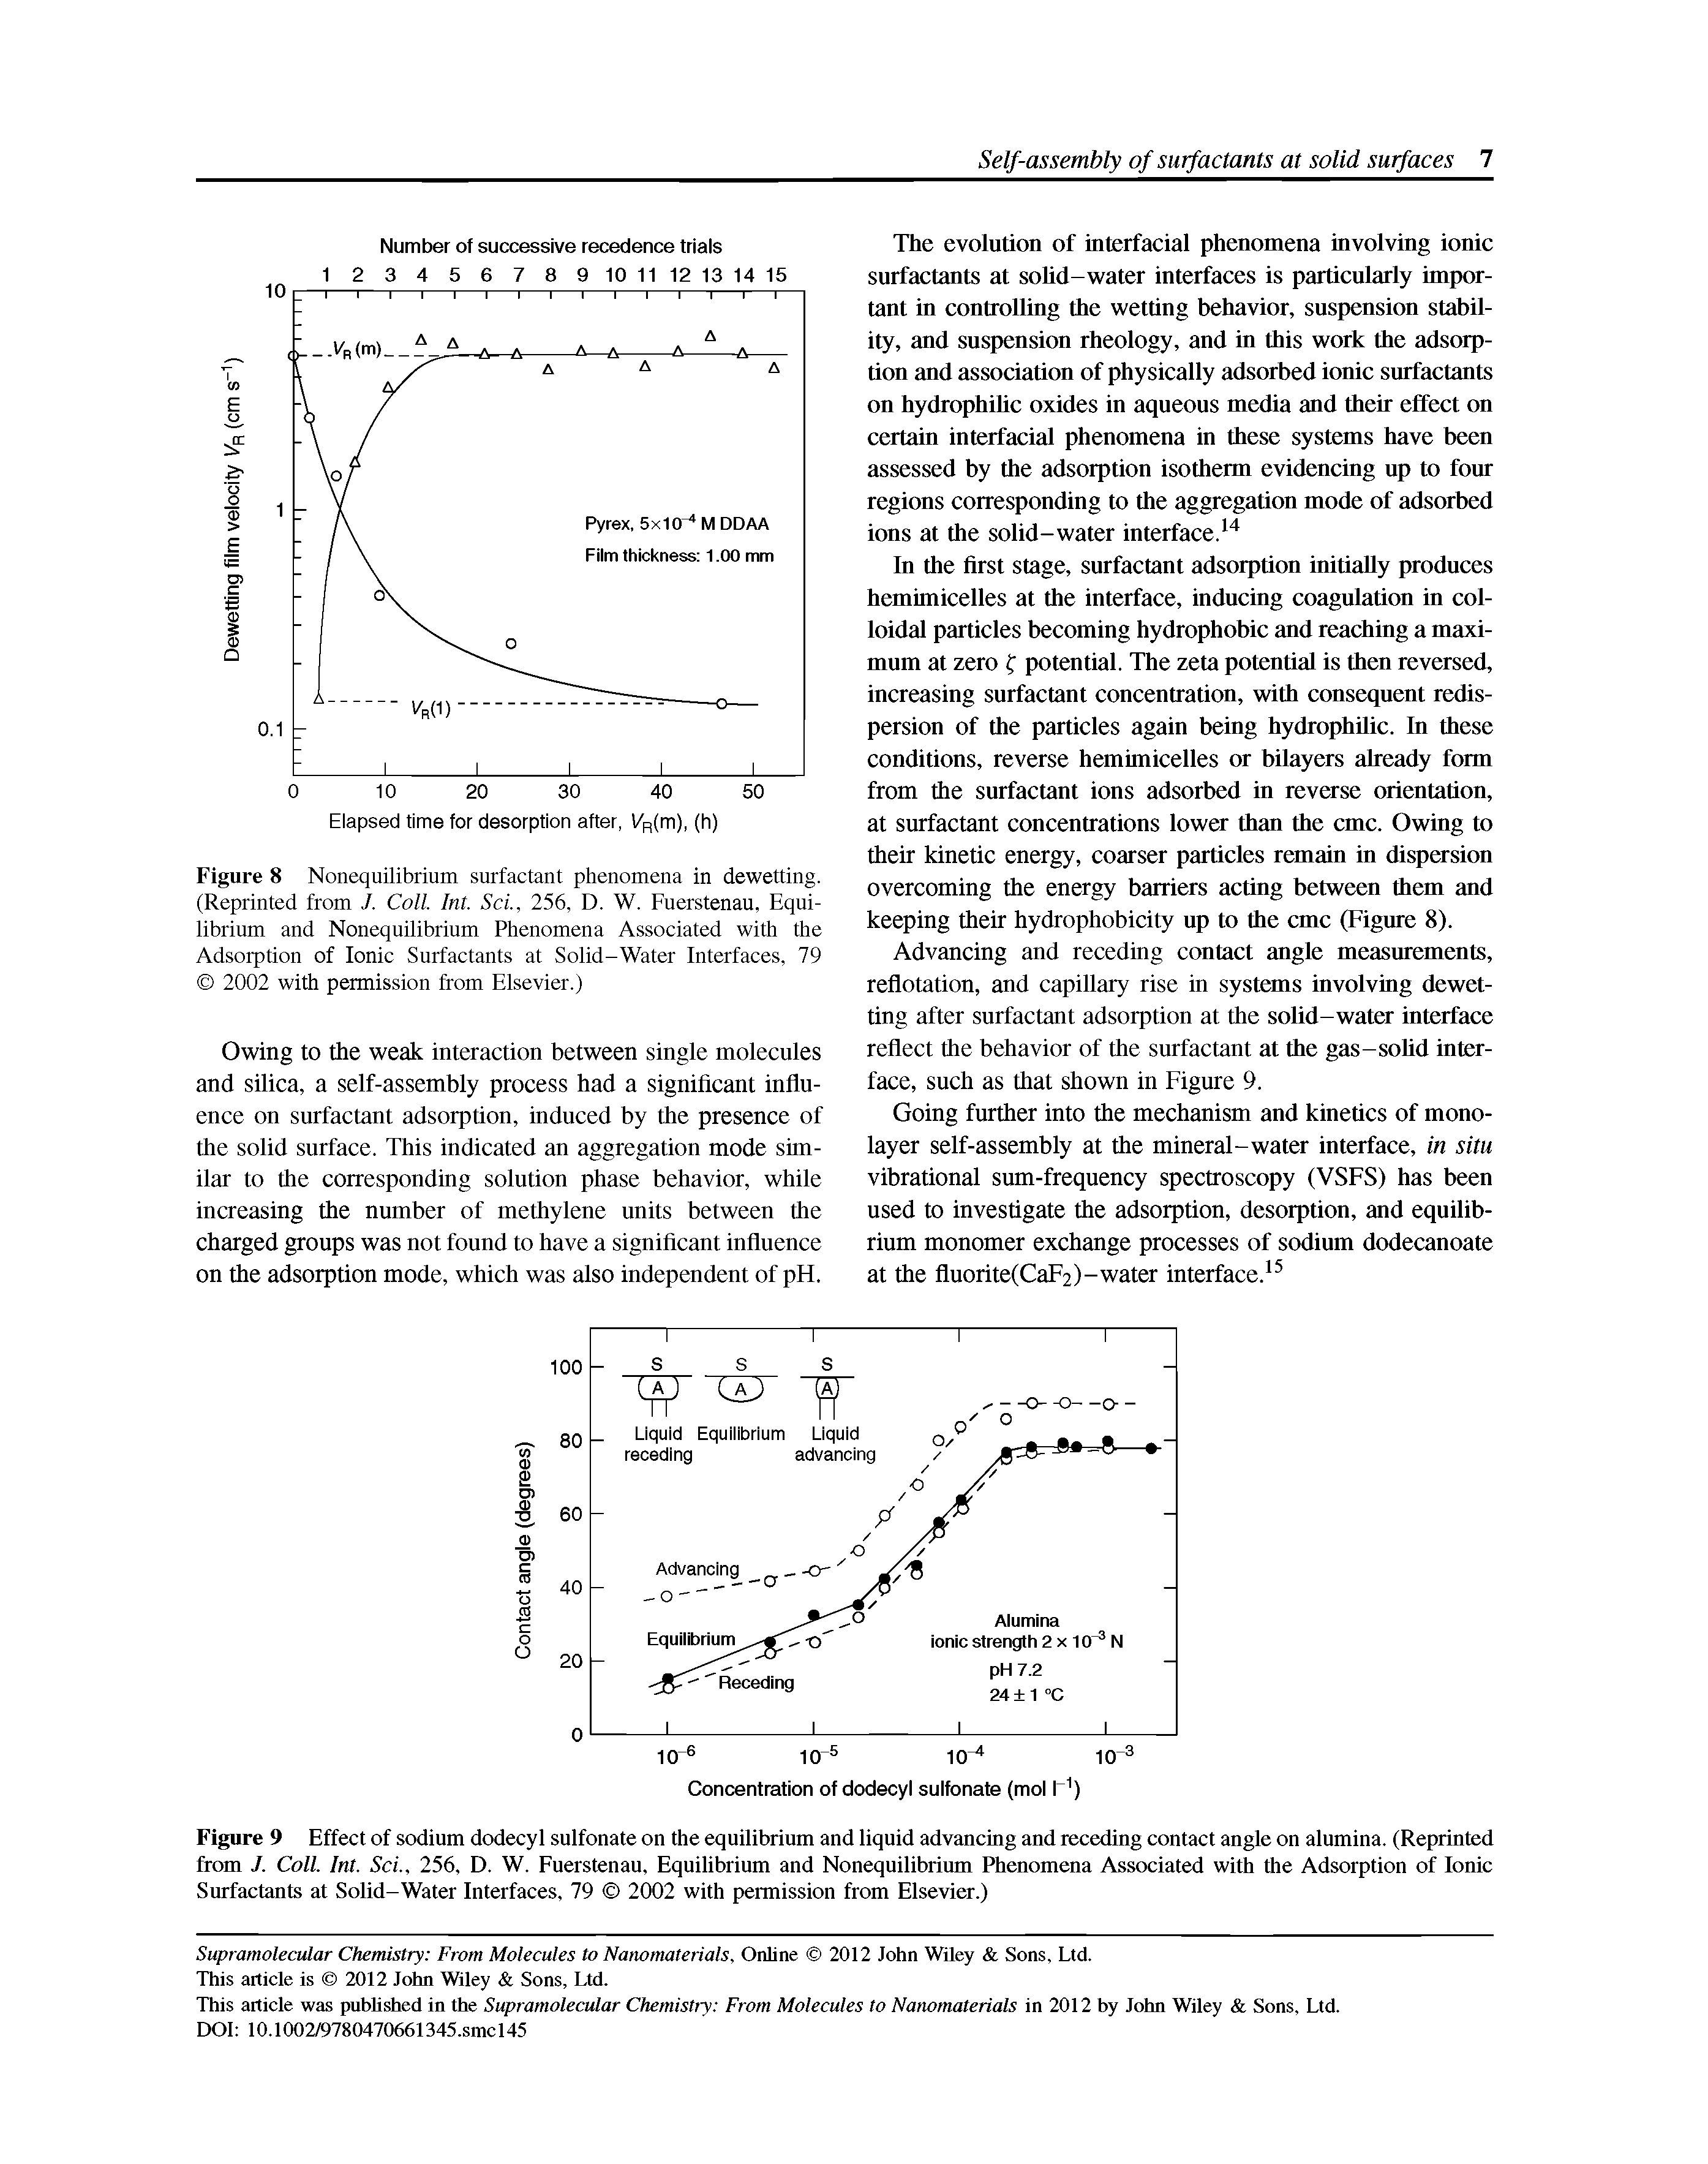 Figure 9 Effect of sodium dodecyl sulfonate on the equilibrium and liquid advancing and receding contact angle on alumina. (Reprinted from 7. Coll. Int. ScL, 256, D. W. Fuerstenau, Equilibrium and Nonequilibrium Phenomena Associated with the Adsorption of Ionic Surfactants at Solid-Water Interfaces, 79 2002 with permission from Elsevier.)...